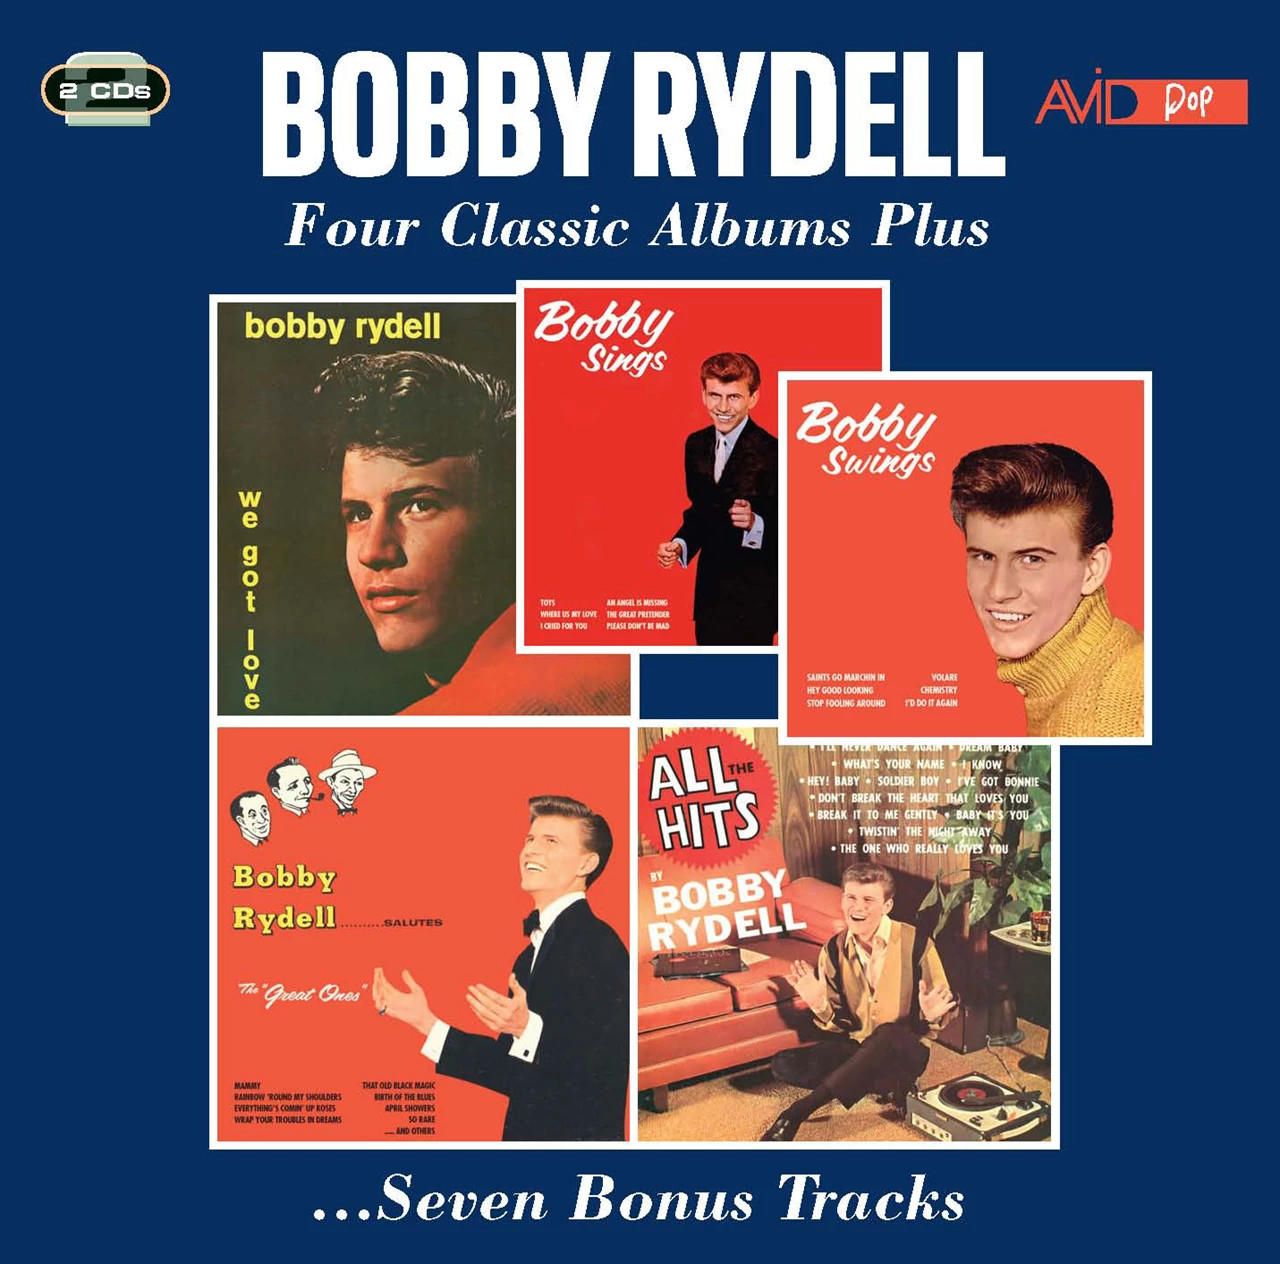 Bobby Rydell - CLASSIC ALBUMS FOUR (CD) PLUS 